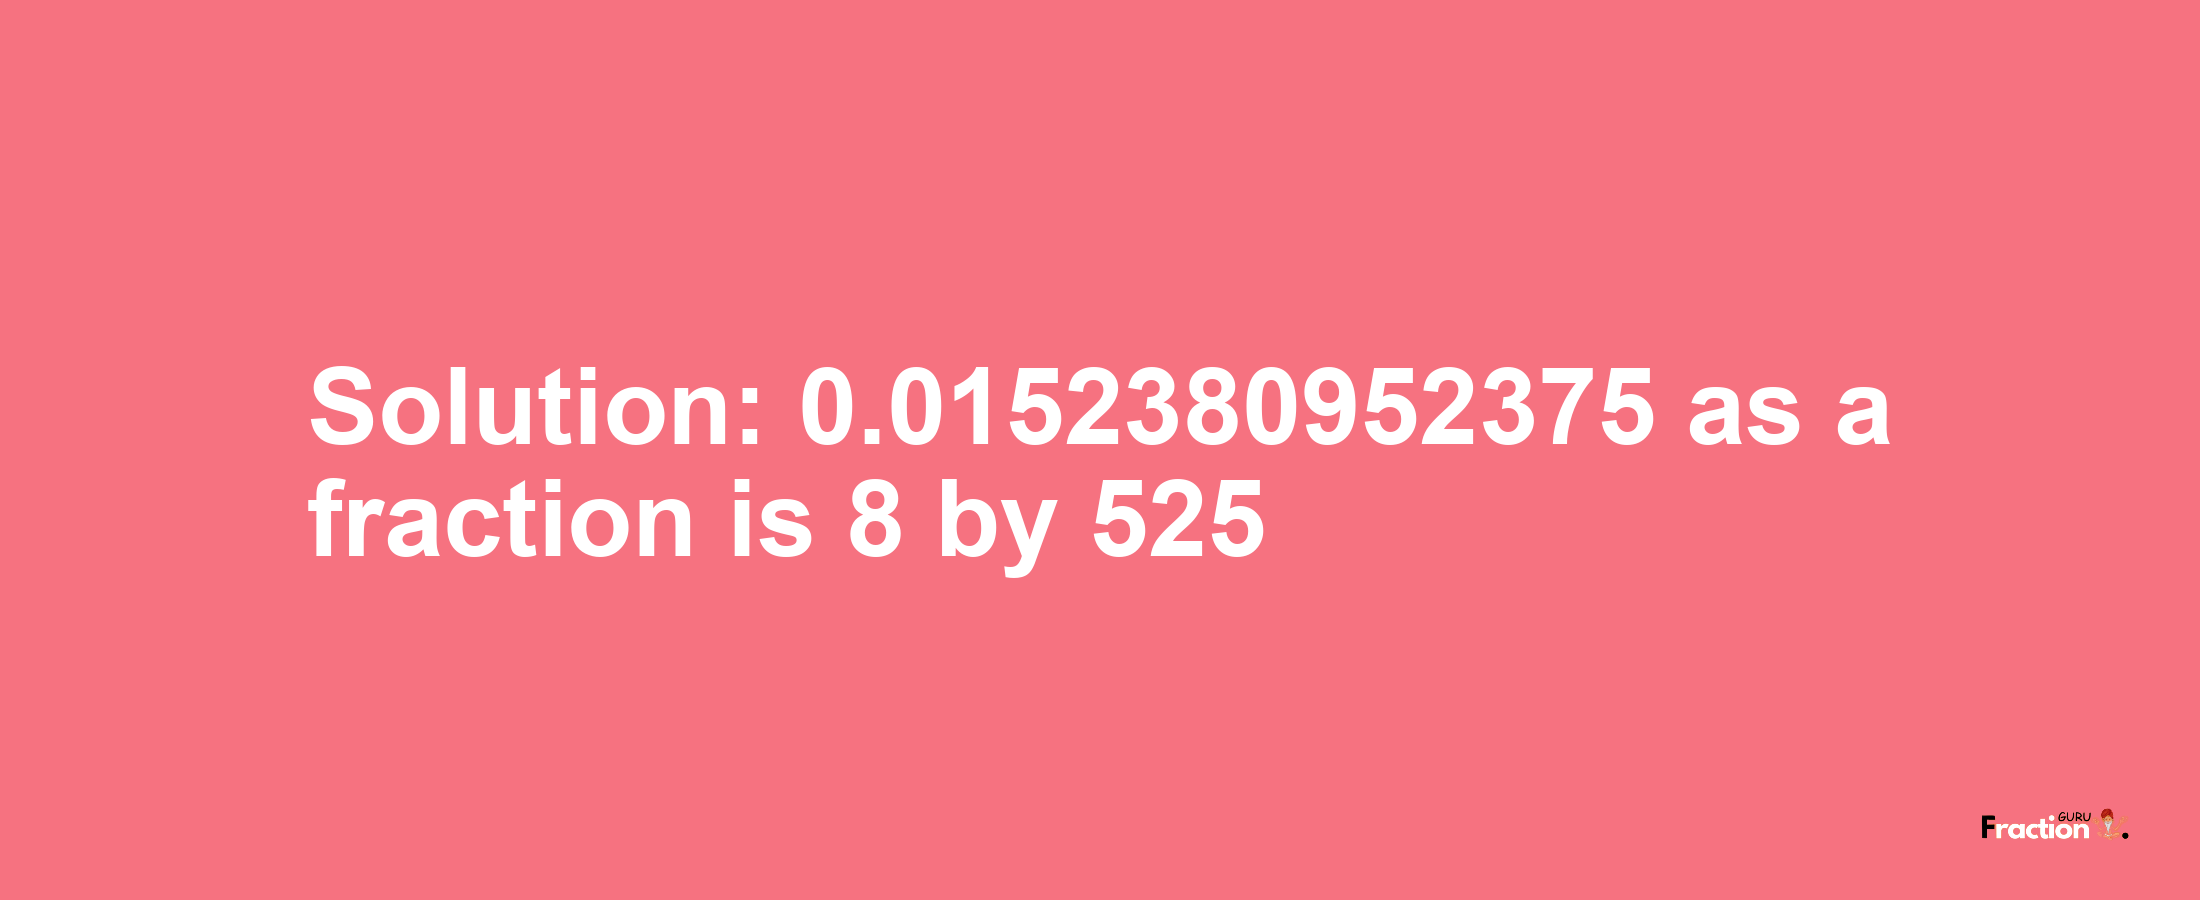 Solution:0.0152380952375 as a fraction is 8/525